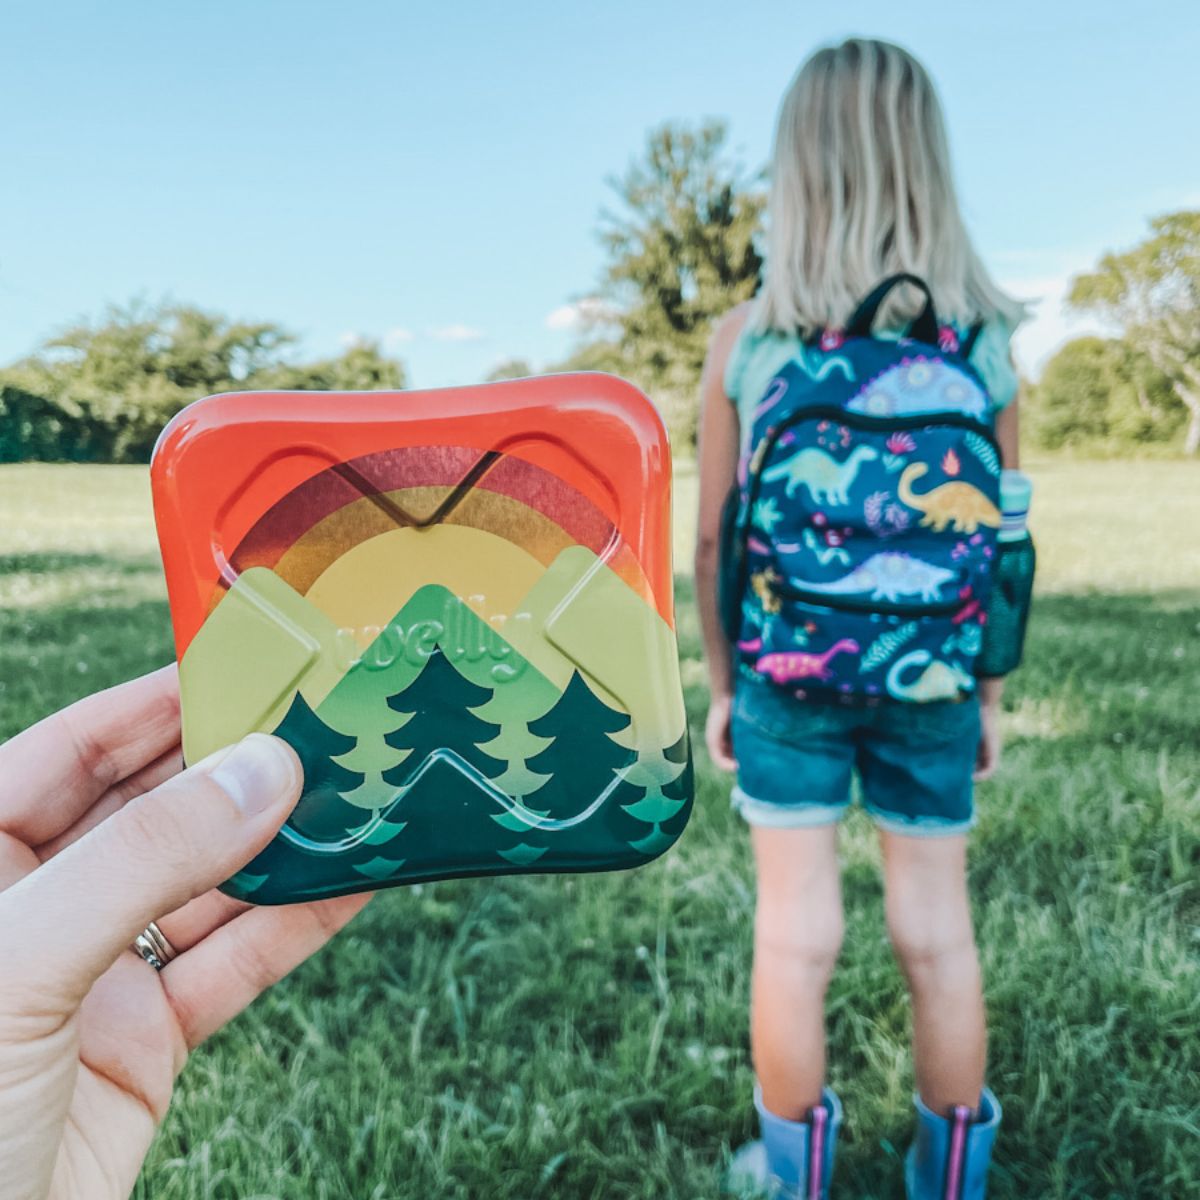 refillable first aid kit being held up in front of a girl with a backpack on